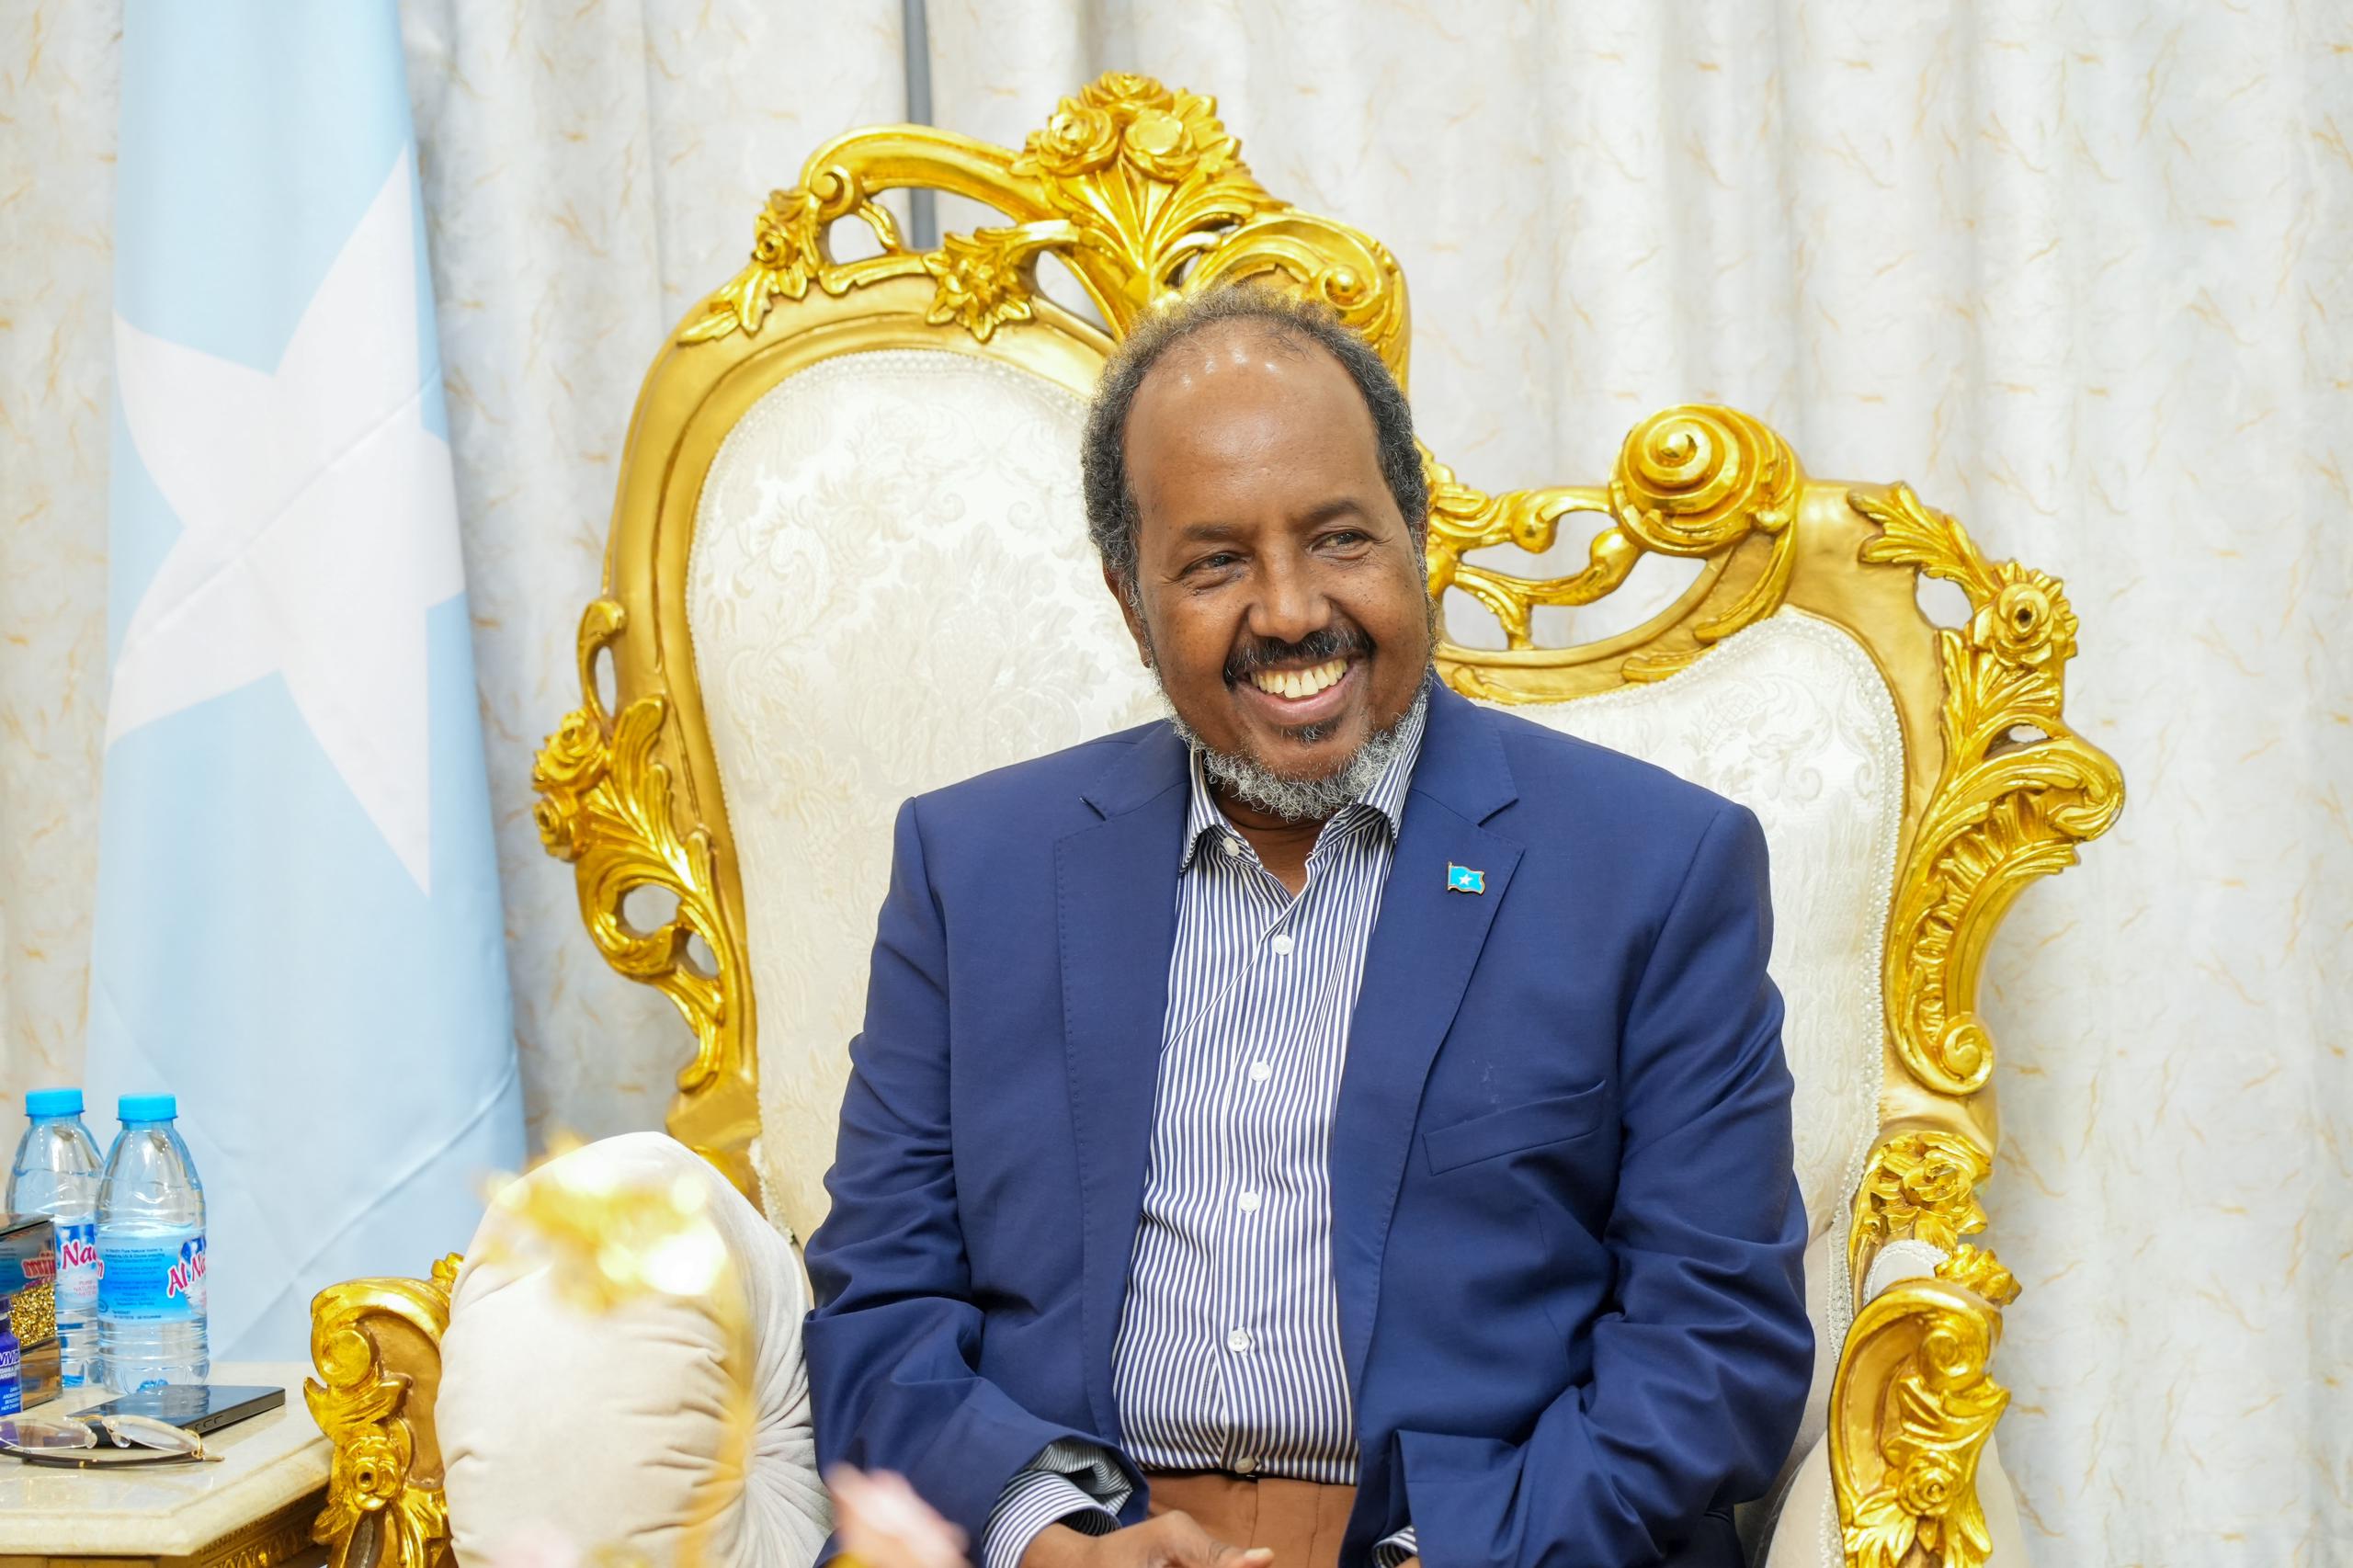 MP KULANE RECOUNTS STRINGS OF FAILURES AS PRESIDENT HASSAN SHEIKH CELEBRATES HIS SECOND YEAR ANNIVERSARY